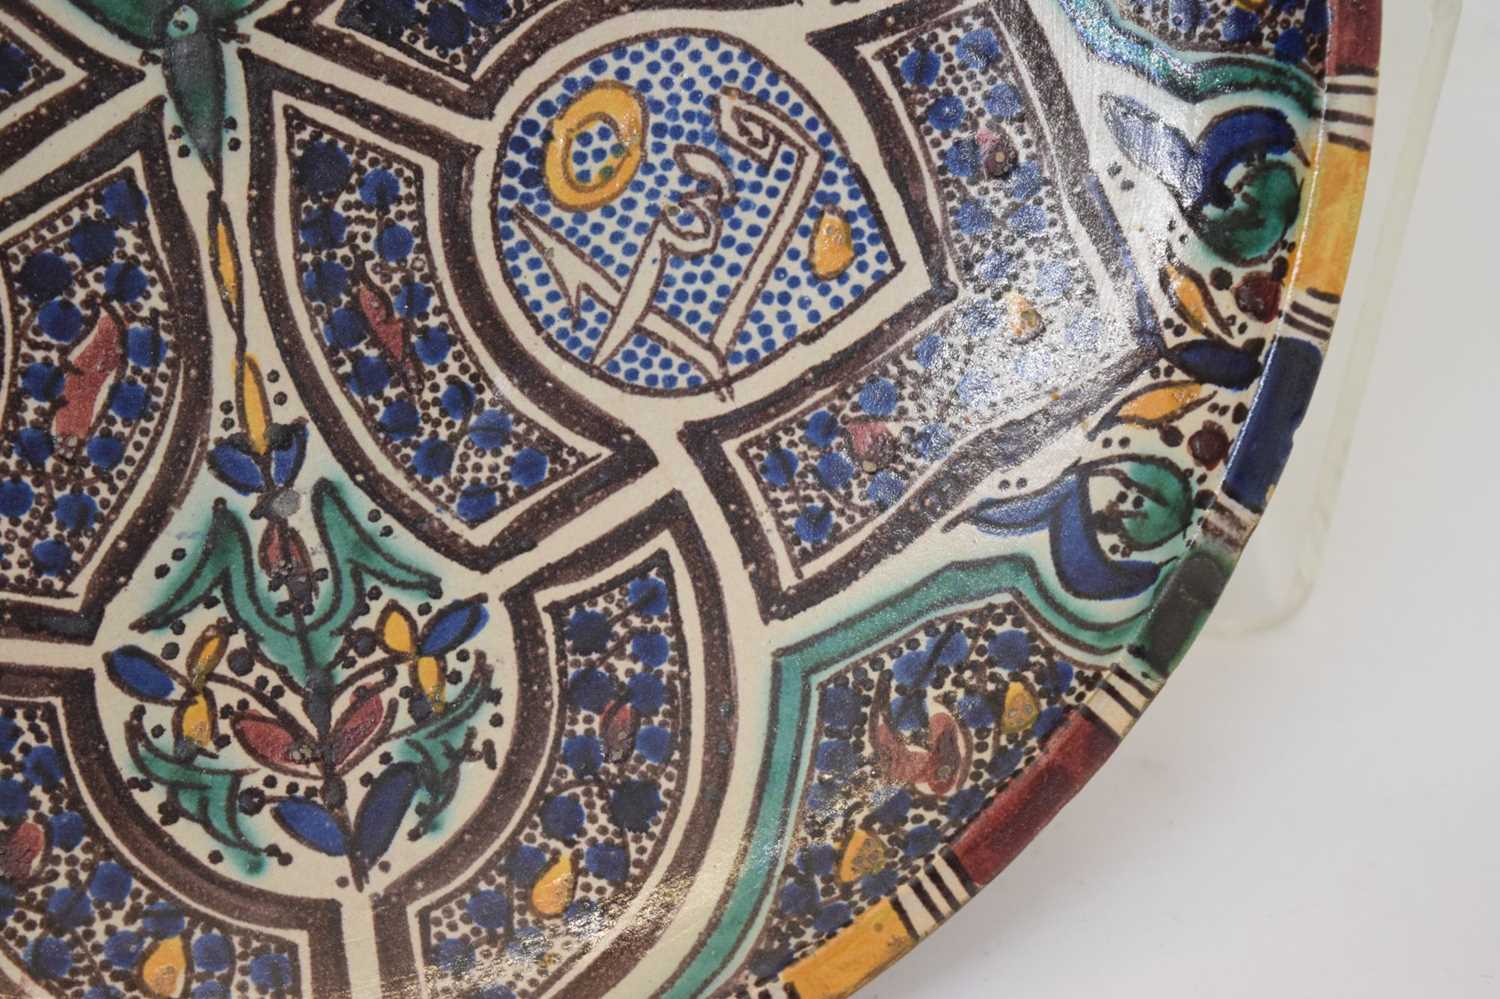 North African (Moroccan) earthenware pottery dish - Image 5 of 8